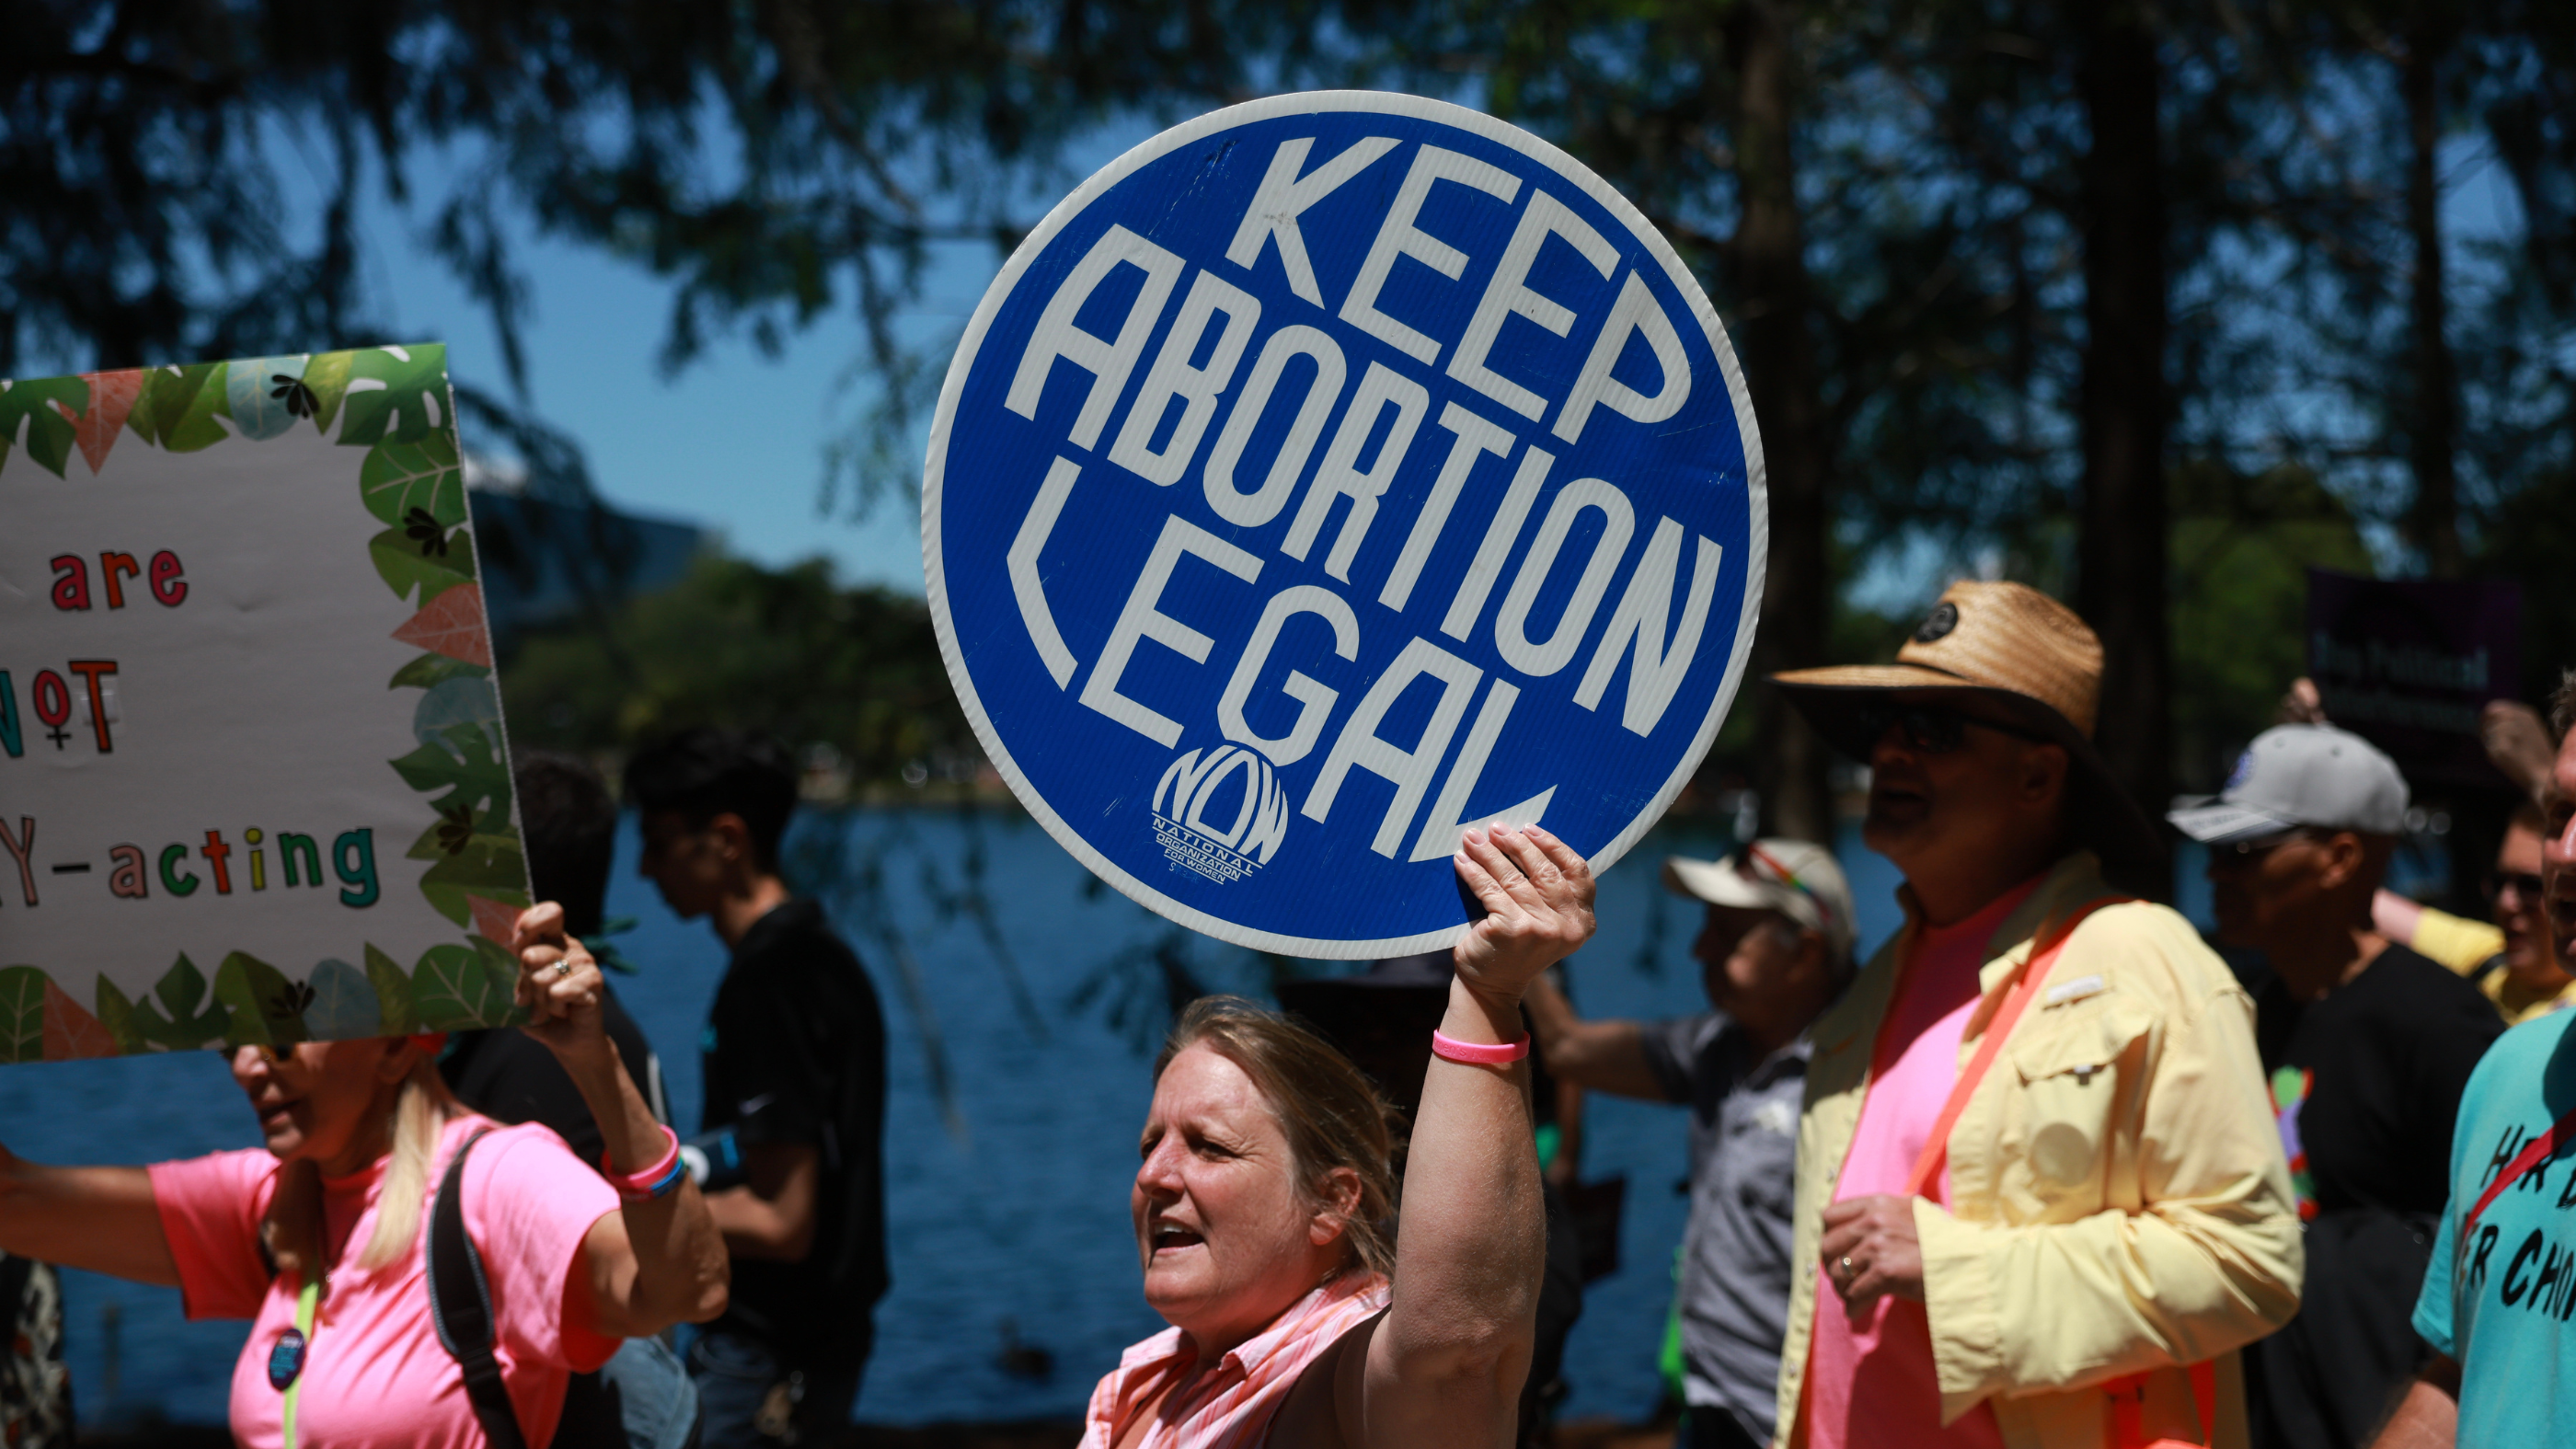 Florida’s 6-week abortion ban takes effect, dozens arrested in campus protests overnight and King Charles resumes public duties